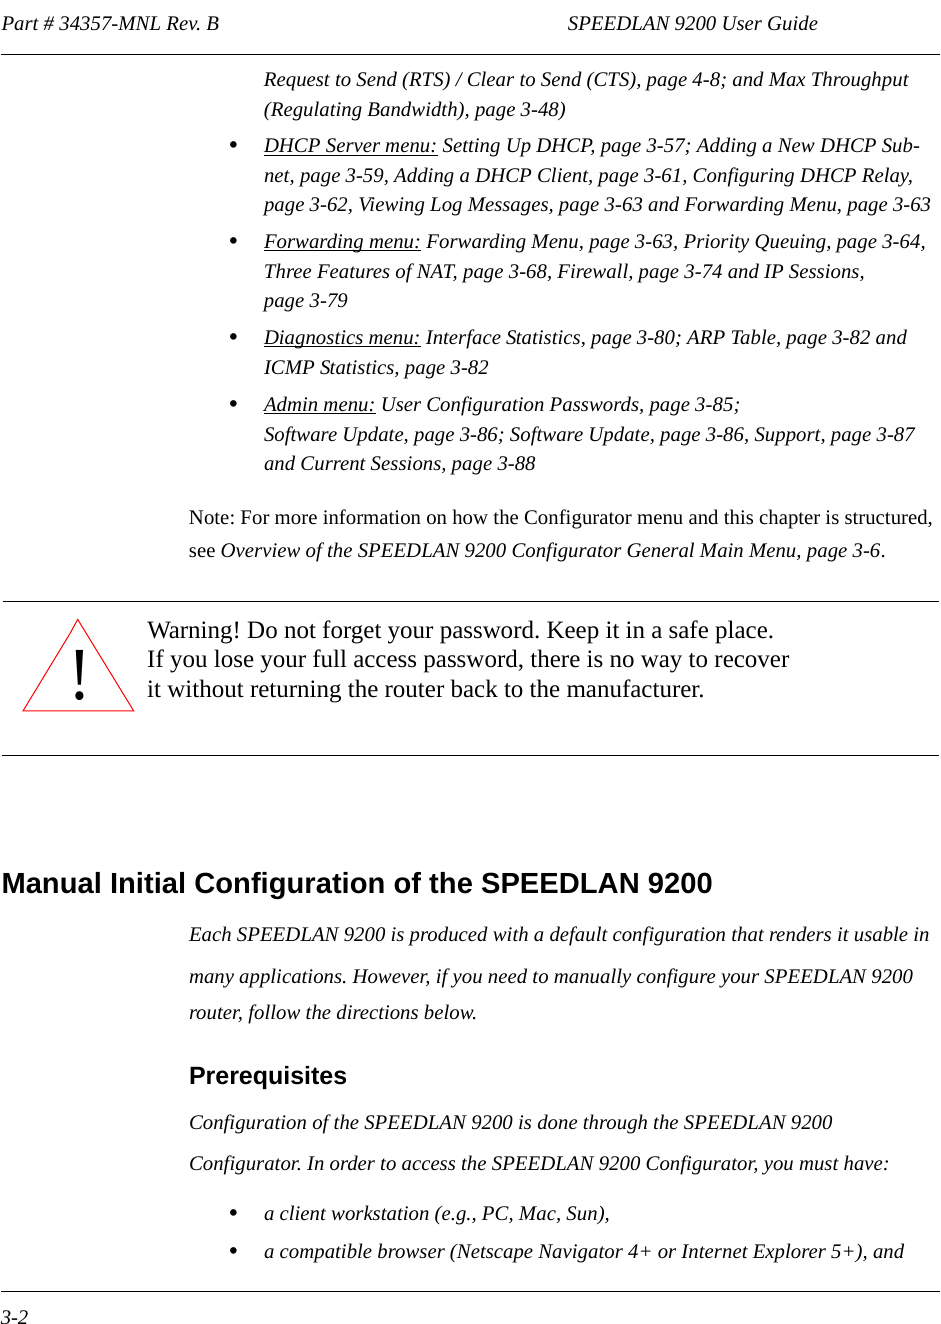 Part # 34357-MNL Rev. B                                                                   SPEEDLAN 9200 User Guide 3-2Request to Send (RTS) / Clear to Send (CTS), page 4-8; and Max Throughput (Regulating Bandwidth), page 3-48)•DHCP Server menu: Setting Up DHCP, page 3-57; Adding a New DHCP Sub-net, page 3-59, Adding a DHCP Client, page 3-61, Configuring DHCP Relay, page 3-62, Viewing Log Messages, page 3-63 and Forwarding Menu, page 3-63•Forwarding menu: Forwarding Menu, page 3-63, Priority Queuing, page 3-64,  Three Features of NAT, page 3-68, Firewall, page 3-74 and IP Sessions, page 3-79•Diagnostics menu: Interface Statistics, page 3-80; ARP Table, page 3-82 and ICMP Statistics, page 3-82•Admin menu: User Configuration Passwords, page 3-85;Software Update, page 3-86; Software Update, page 3-86, Support, page 3-87 and Current Sessions, page 3-88Note: For more information on how the Configurator menu and this chapter is structured, see Overview of the SPEEDLAN 9200 Configurator General Main Menu, page 3-6.Manual Initial Configuration of the SPEEDLAN 9200Each SPEEDLAN 9200 is produced with a default configuration that renders it usable in many applications. However, if you need to manually configure your SPEEDLAN 9200 router, follow the directions below.Prerequisites Configuration of the SPEEDLAN 9200 is done through the SPEEDLAN 9200 Configurator. In order to access the SPEEDLAN 9200 Configurator, you must have:•a client workstation (e.g., PC, Mac, Sun),•a compatible browser (Netscape Navigator 4+ or Internet Explorer 5+), and!Warning! Do not forget your password. Keep it in a safe place.If you lose your full access password, there is no way to recover it without returning the router back to the manufacturer.               